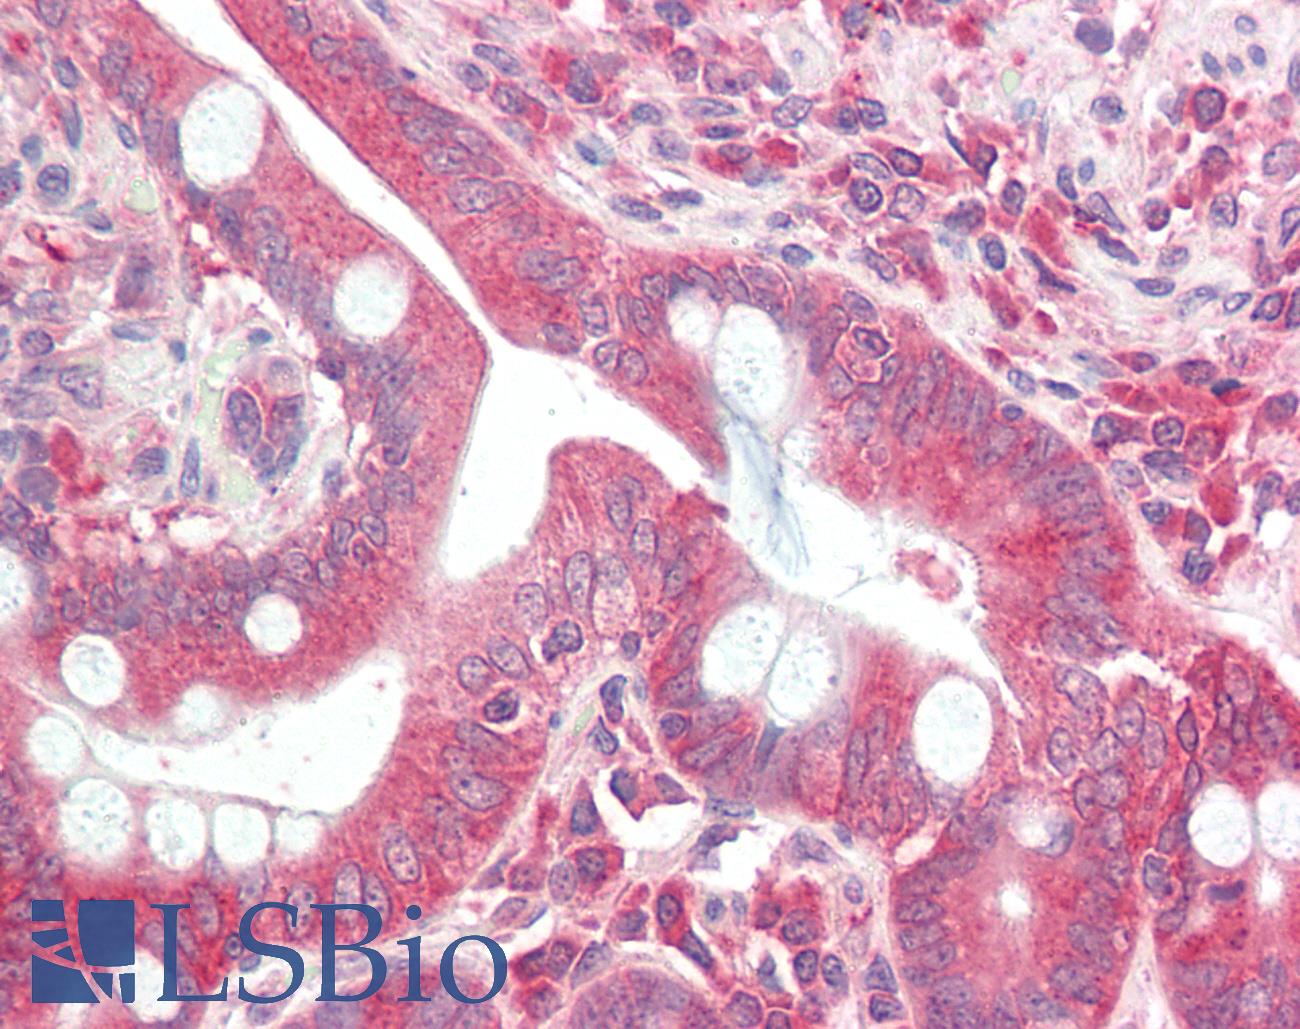 DCP2 Antibody - Anti-DCP2 antibody IHC staining of human small intestine. Immunohistochemistry of formalin-fixed, paraffin-embedded tissue after heat-induced antigen retrieval.